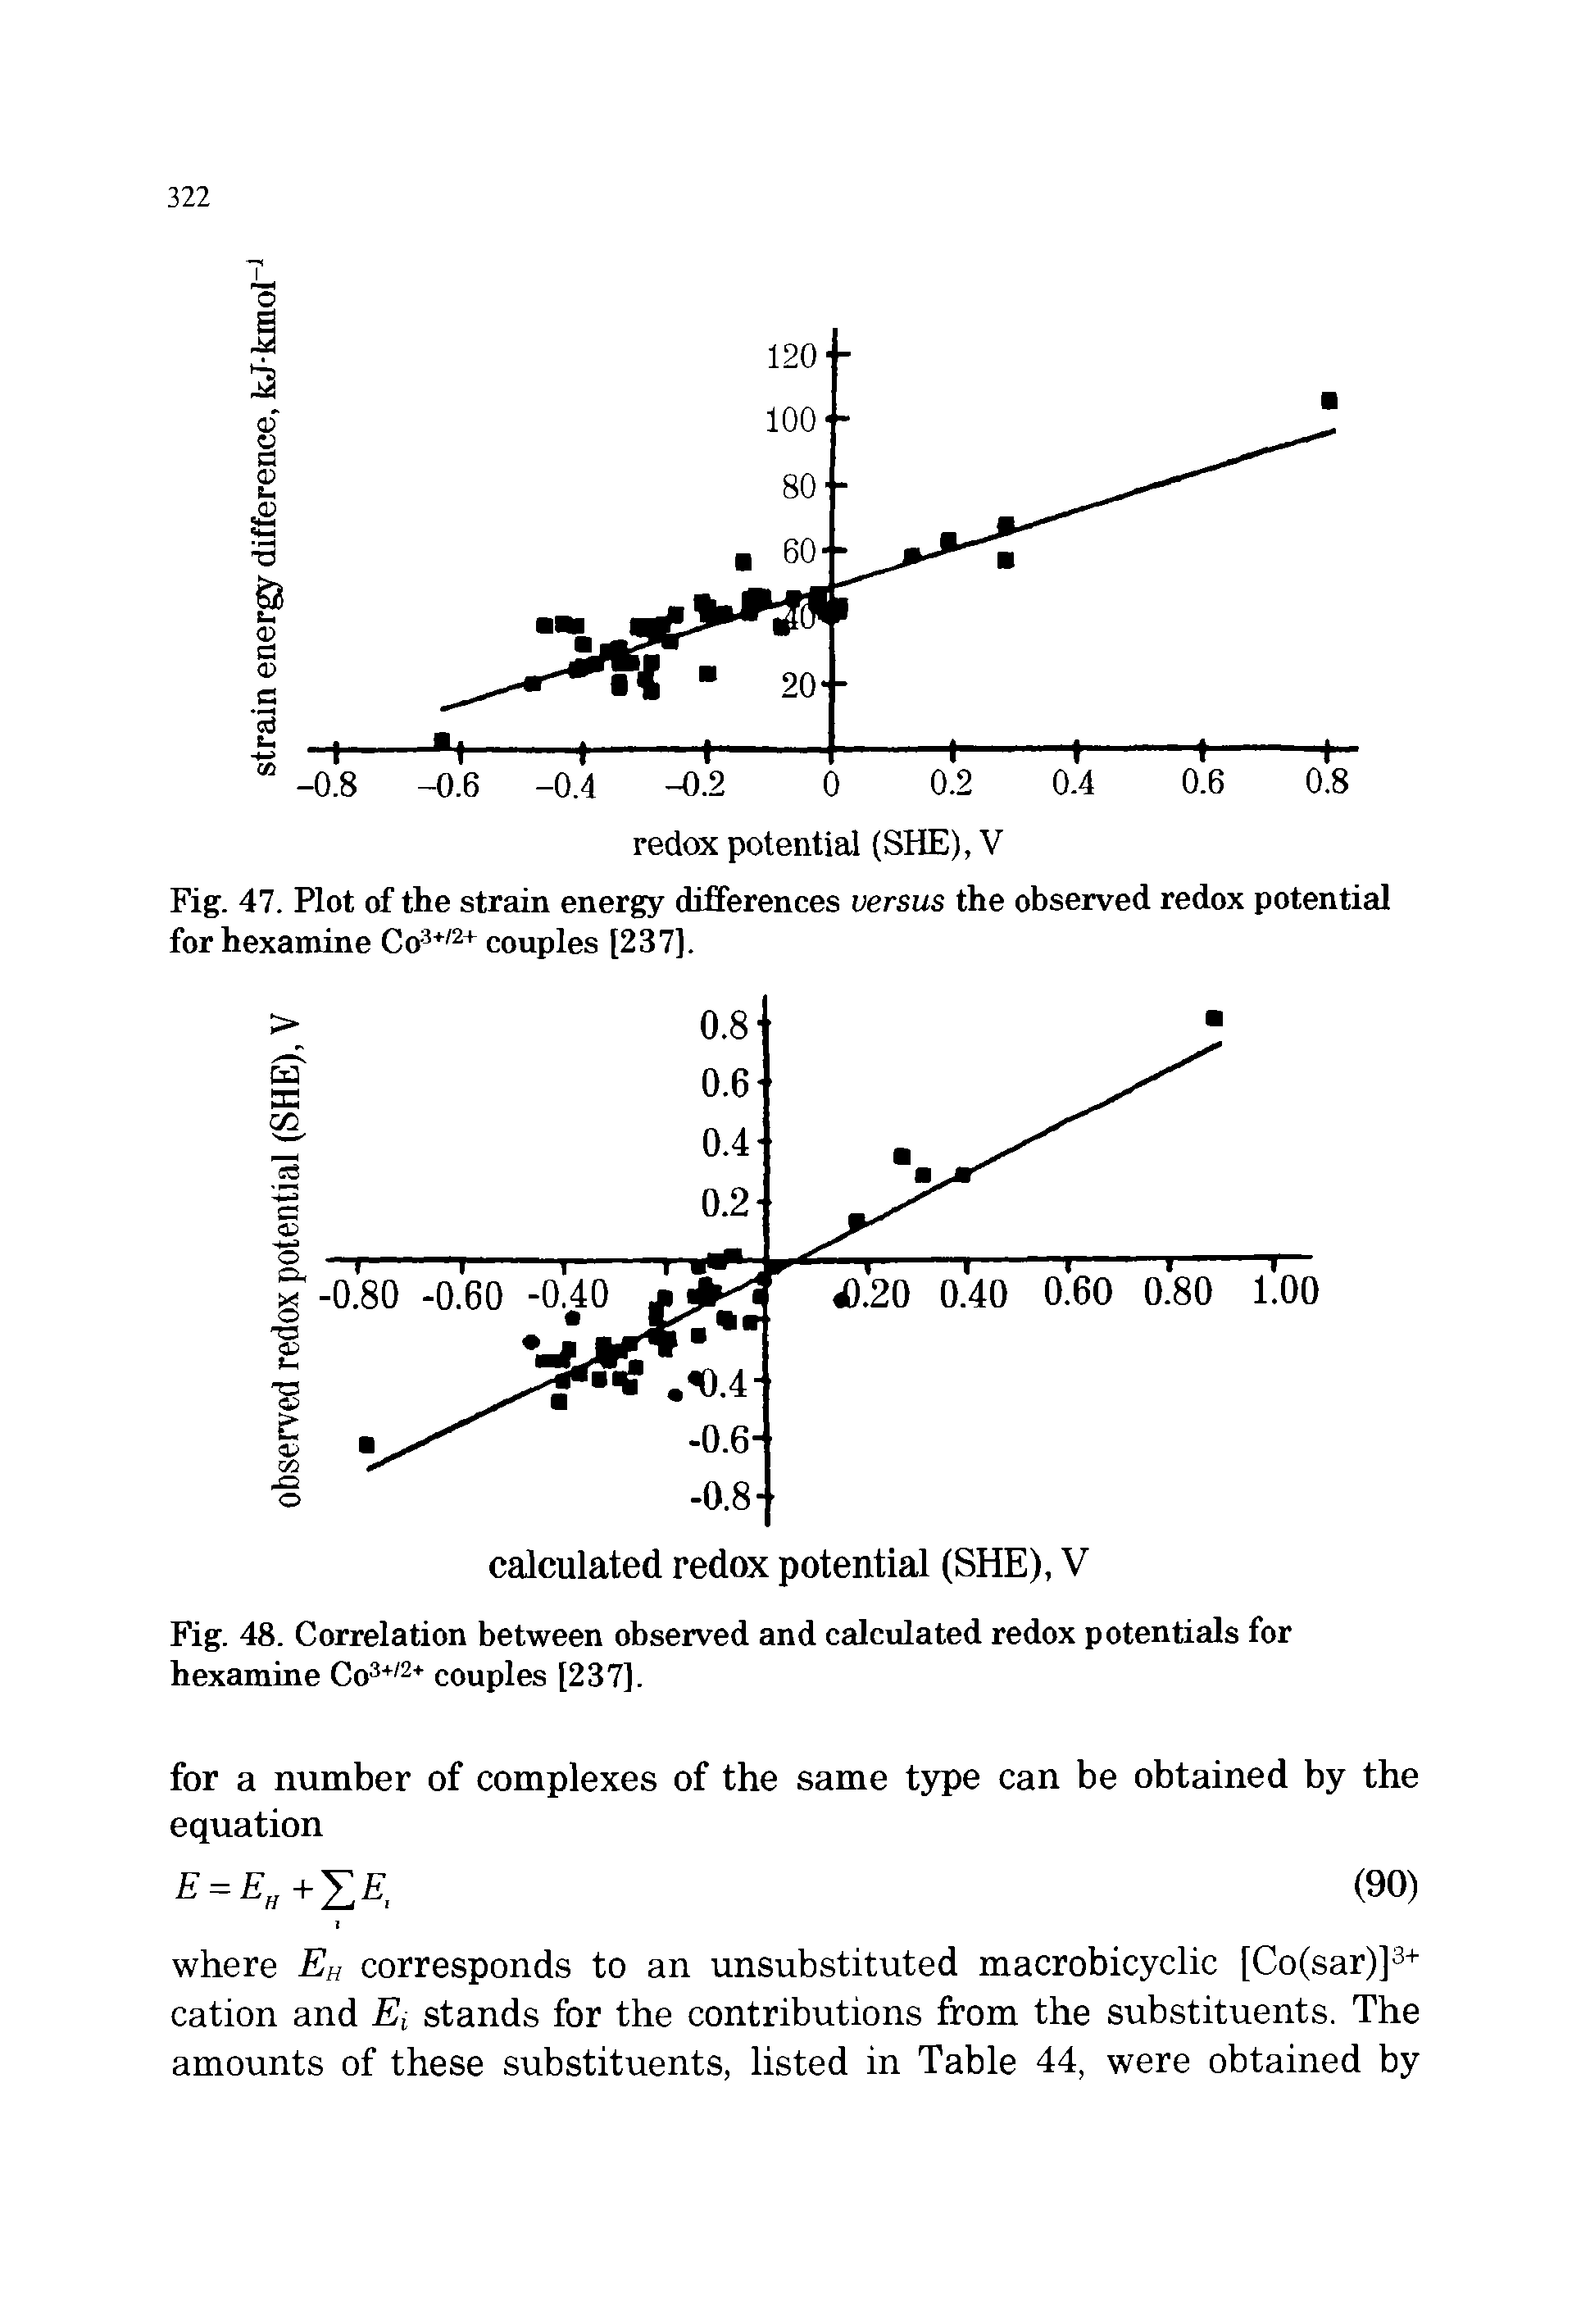 Fig. 47. Plot of the strain energy differences versus the observed redox potential for hexamine Co- 2+ couples [237].